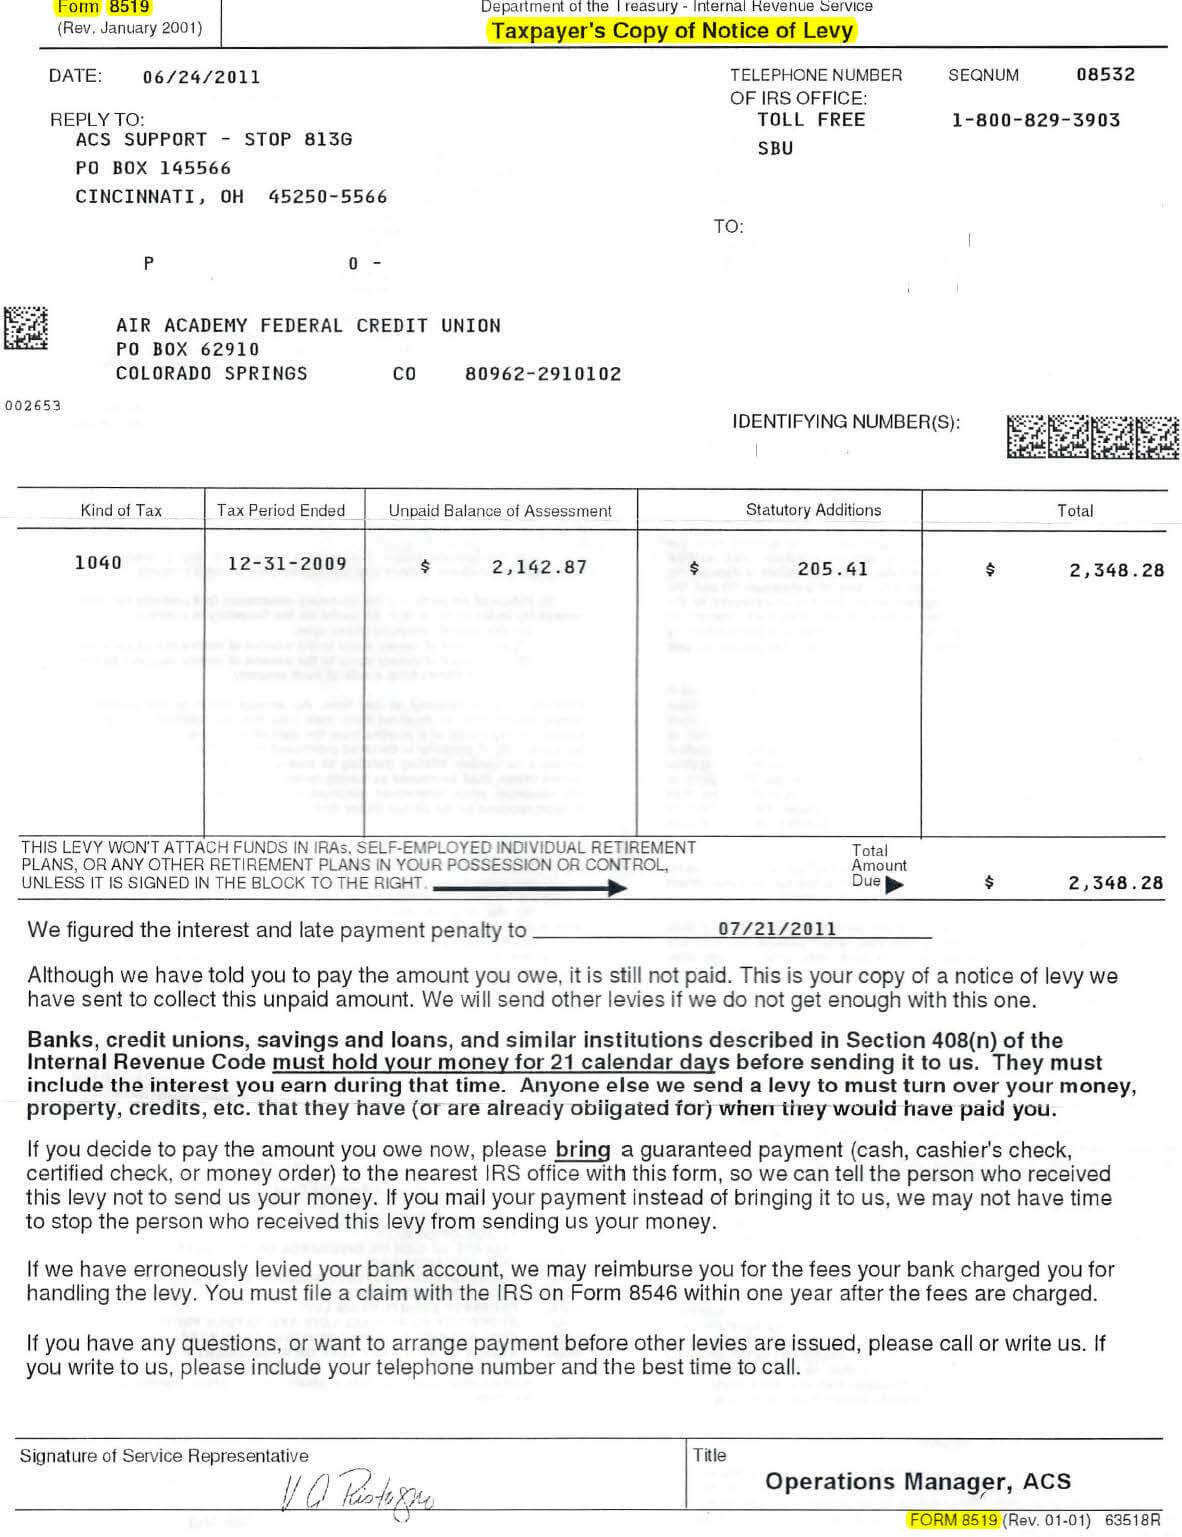 What does IRS Form 8519 look like? Frequently Asked Questions FAQs: Why did I receive this IRS bank levy notice? What do I need to do in response to an IRS bank levy with Form 8519? I don't agree with the IRS collection bank levy form 8519!! Should I call or mail my response to Form 8519? Is there anything else I should know about this IRS bank seizure notice? Call TaxhelpLaw at 719 232 2587 in Colorado Springs or 303 829 4357 (TAX-HELP) in Denver!!!